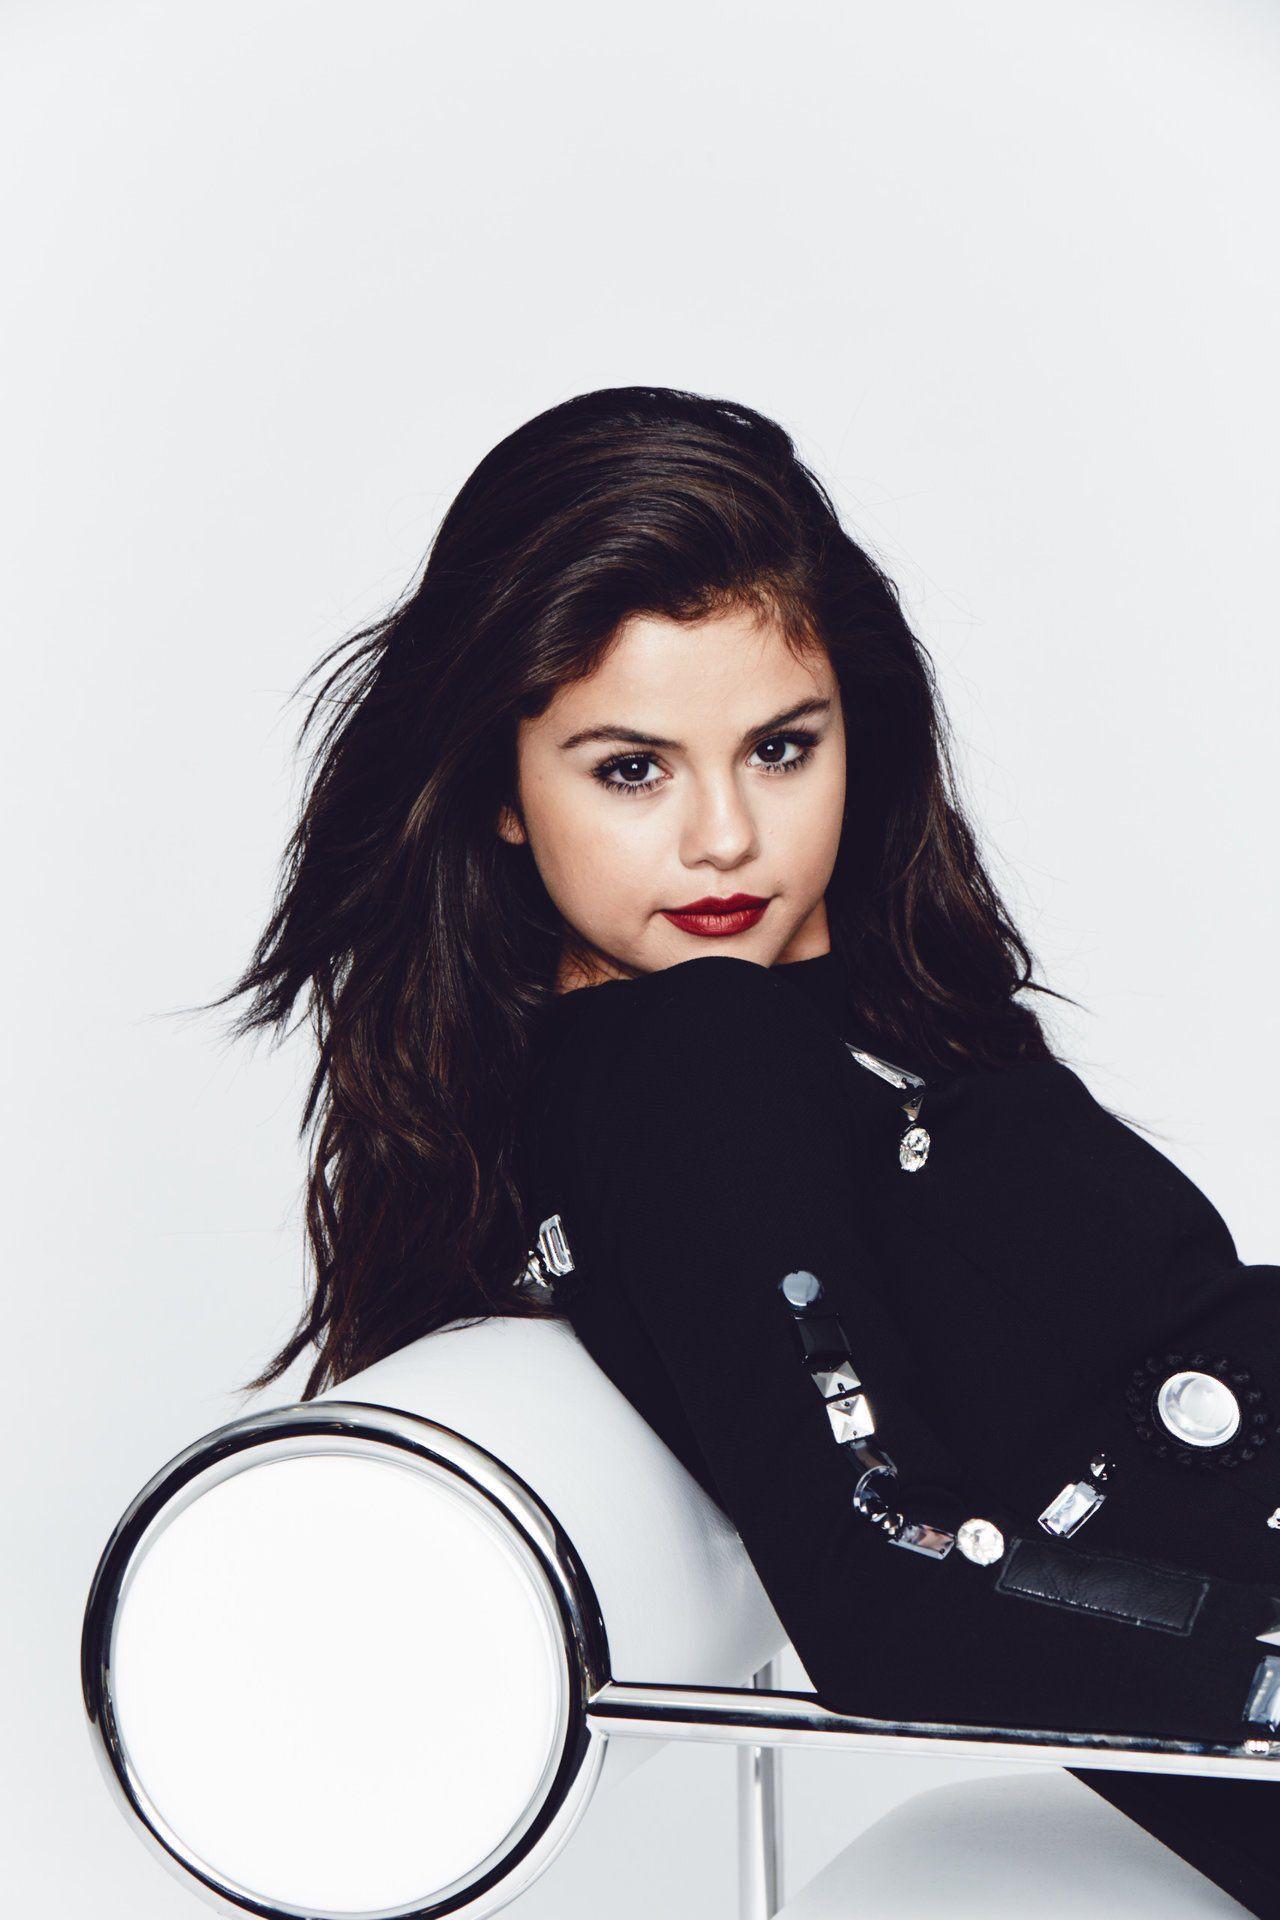 Selena Rare Pictures Wallpapers